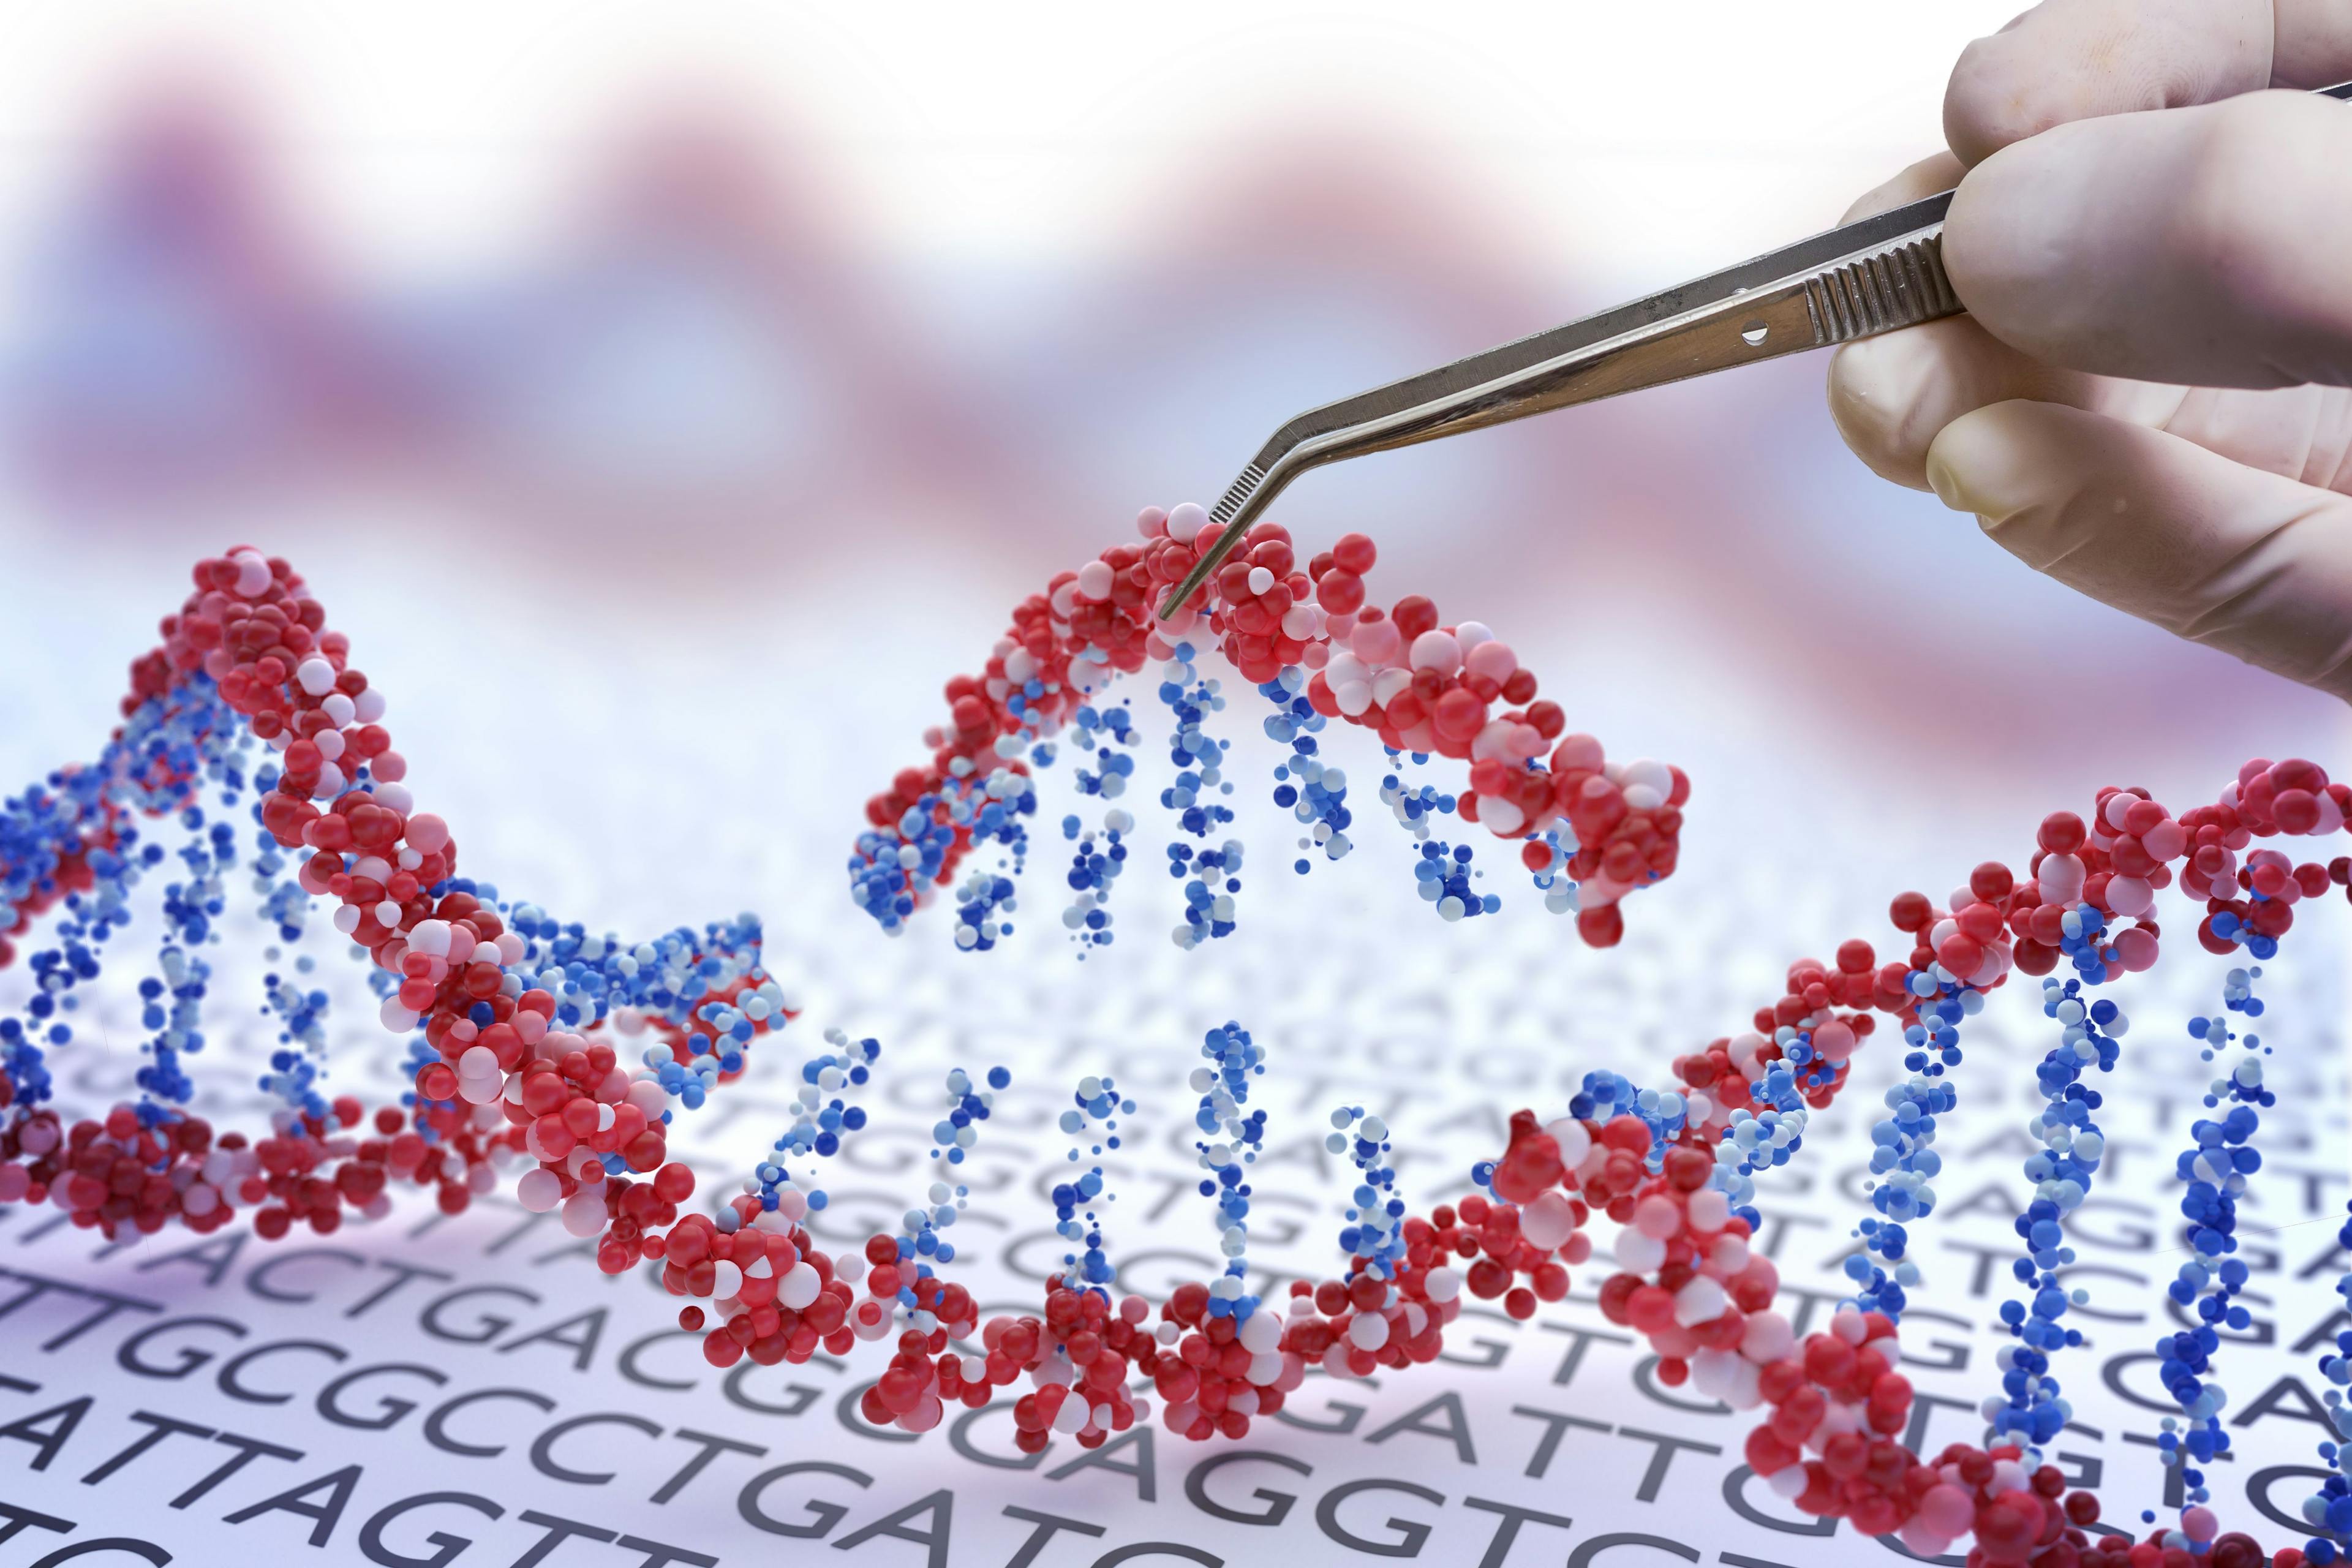 Will Gene Therapy Change the Treatment of Muscular Dystrophy?